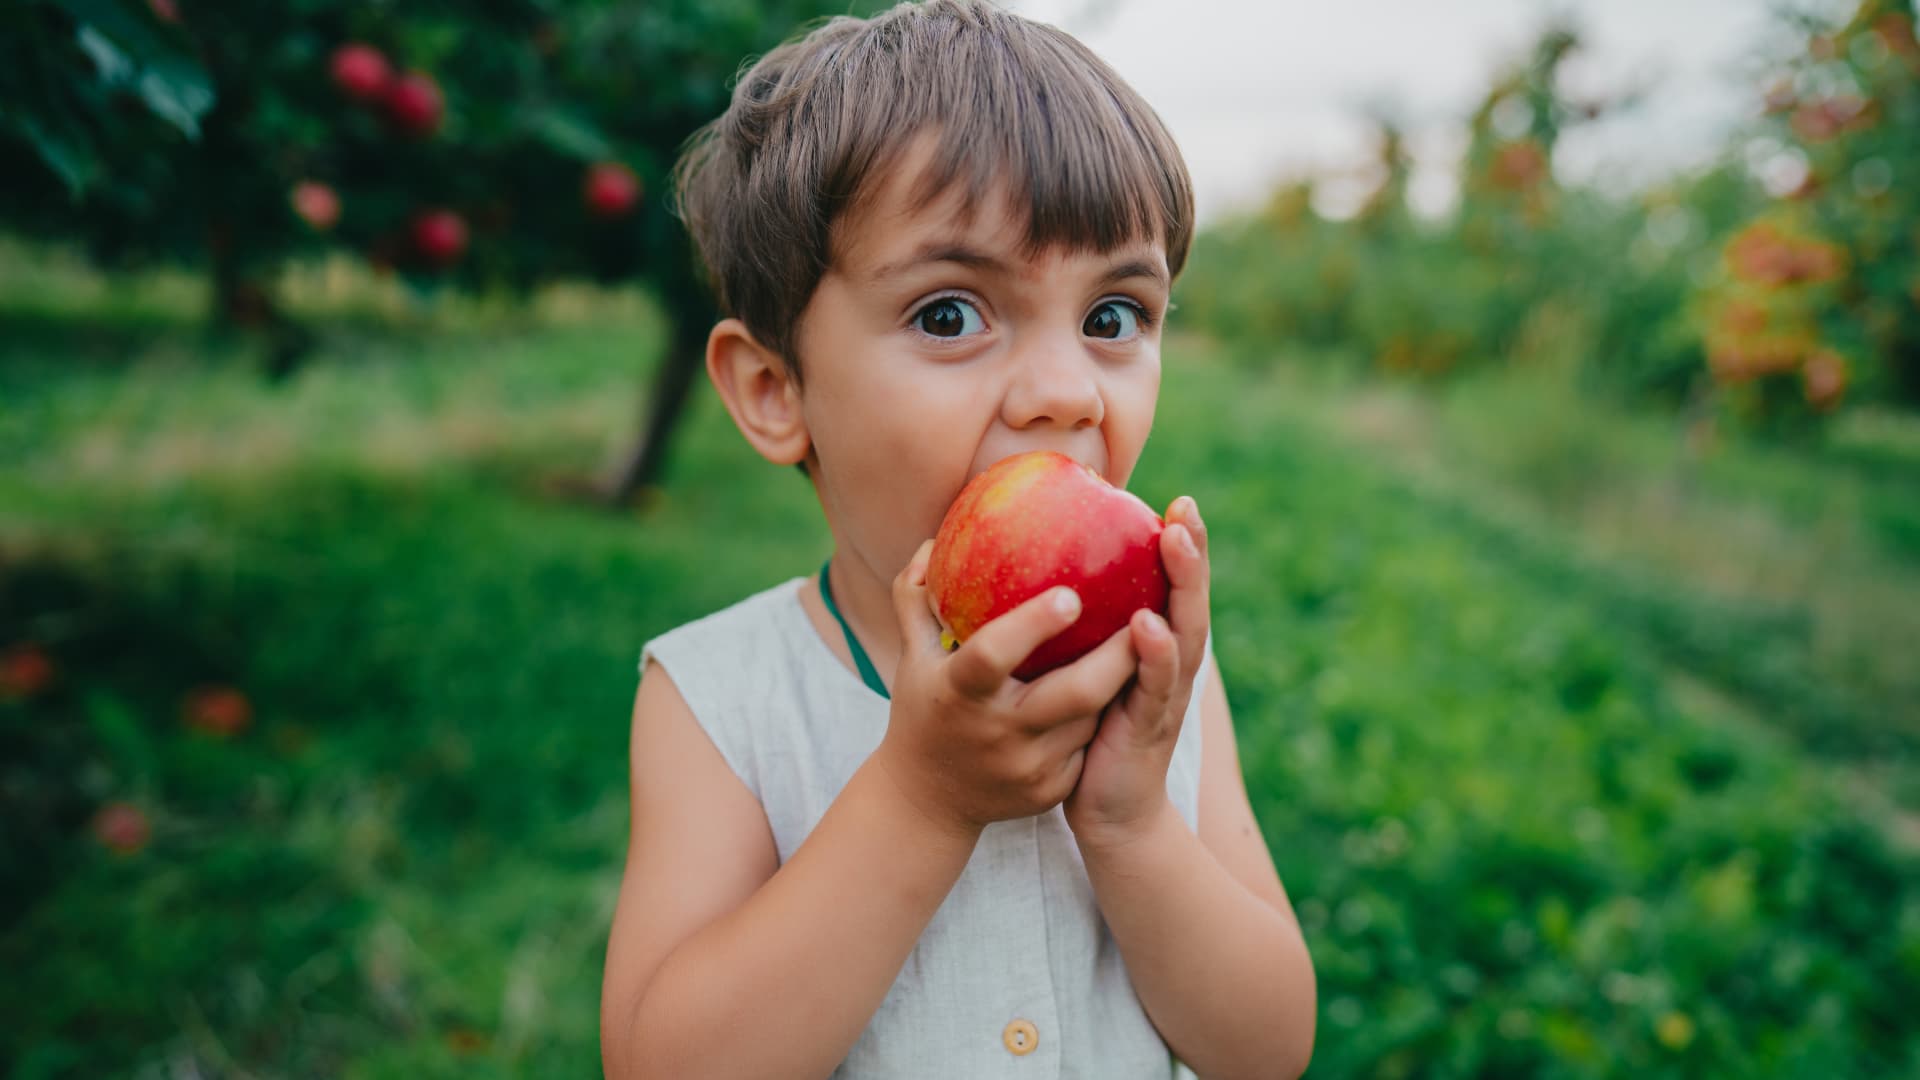 A Harvard nutritionist shares 6 brain foods that will help your kids stay ‘sharp and focused’